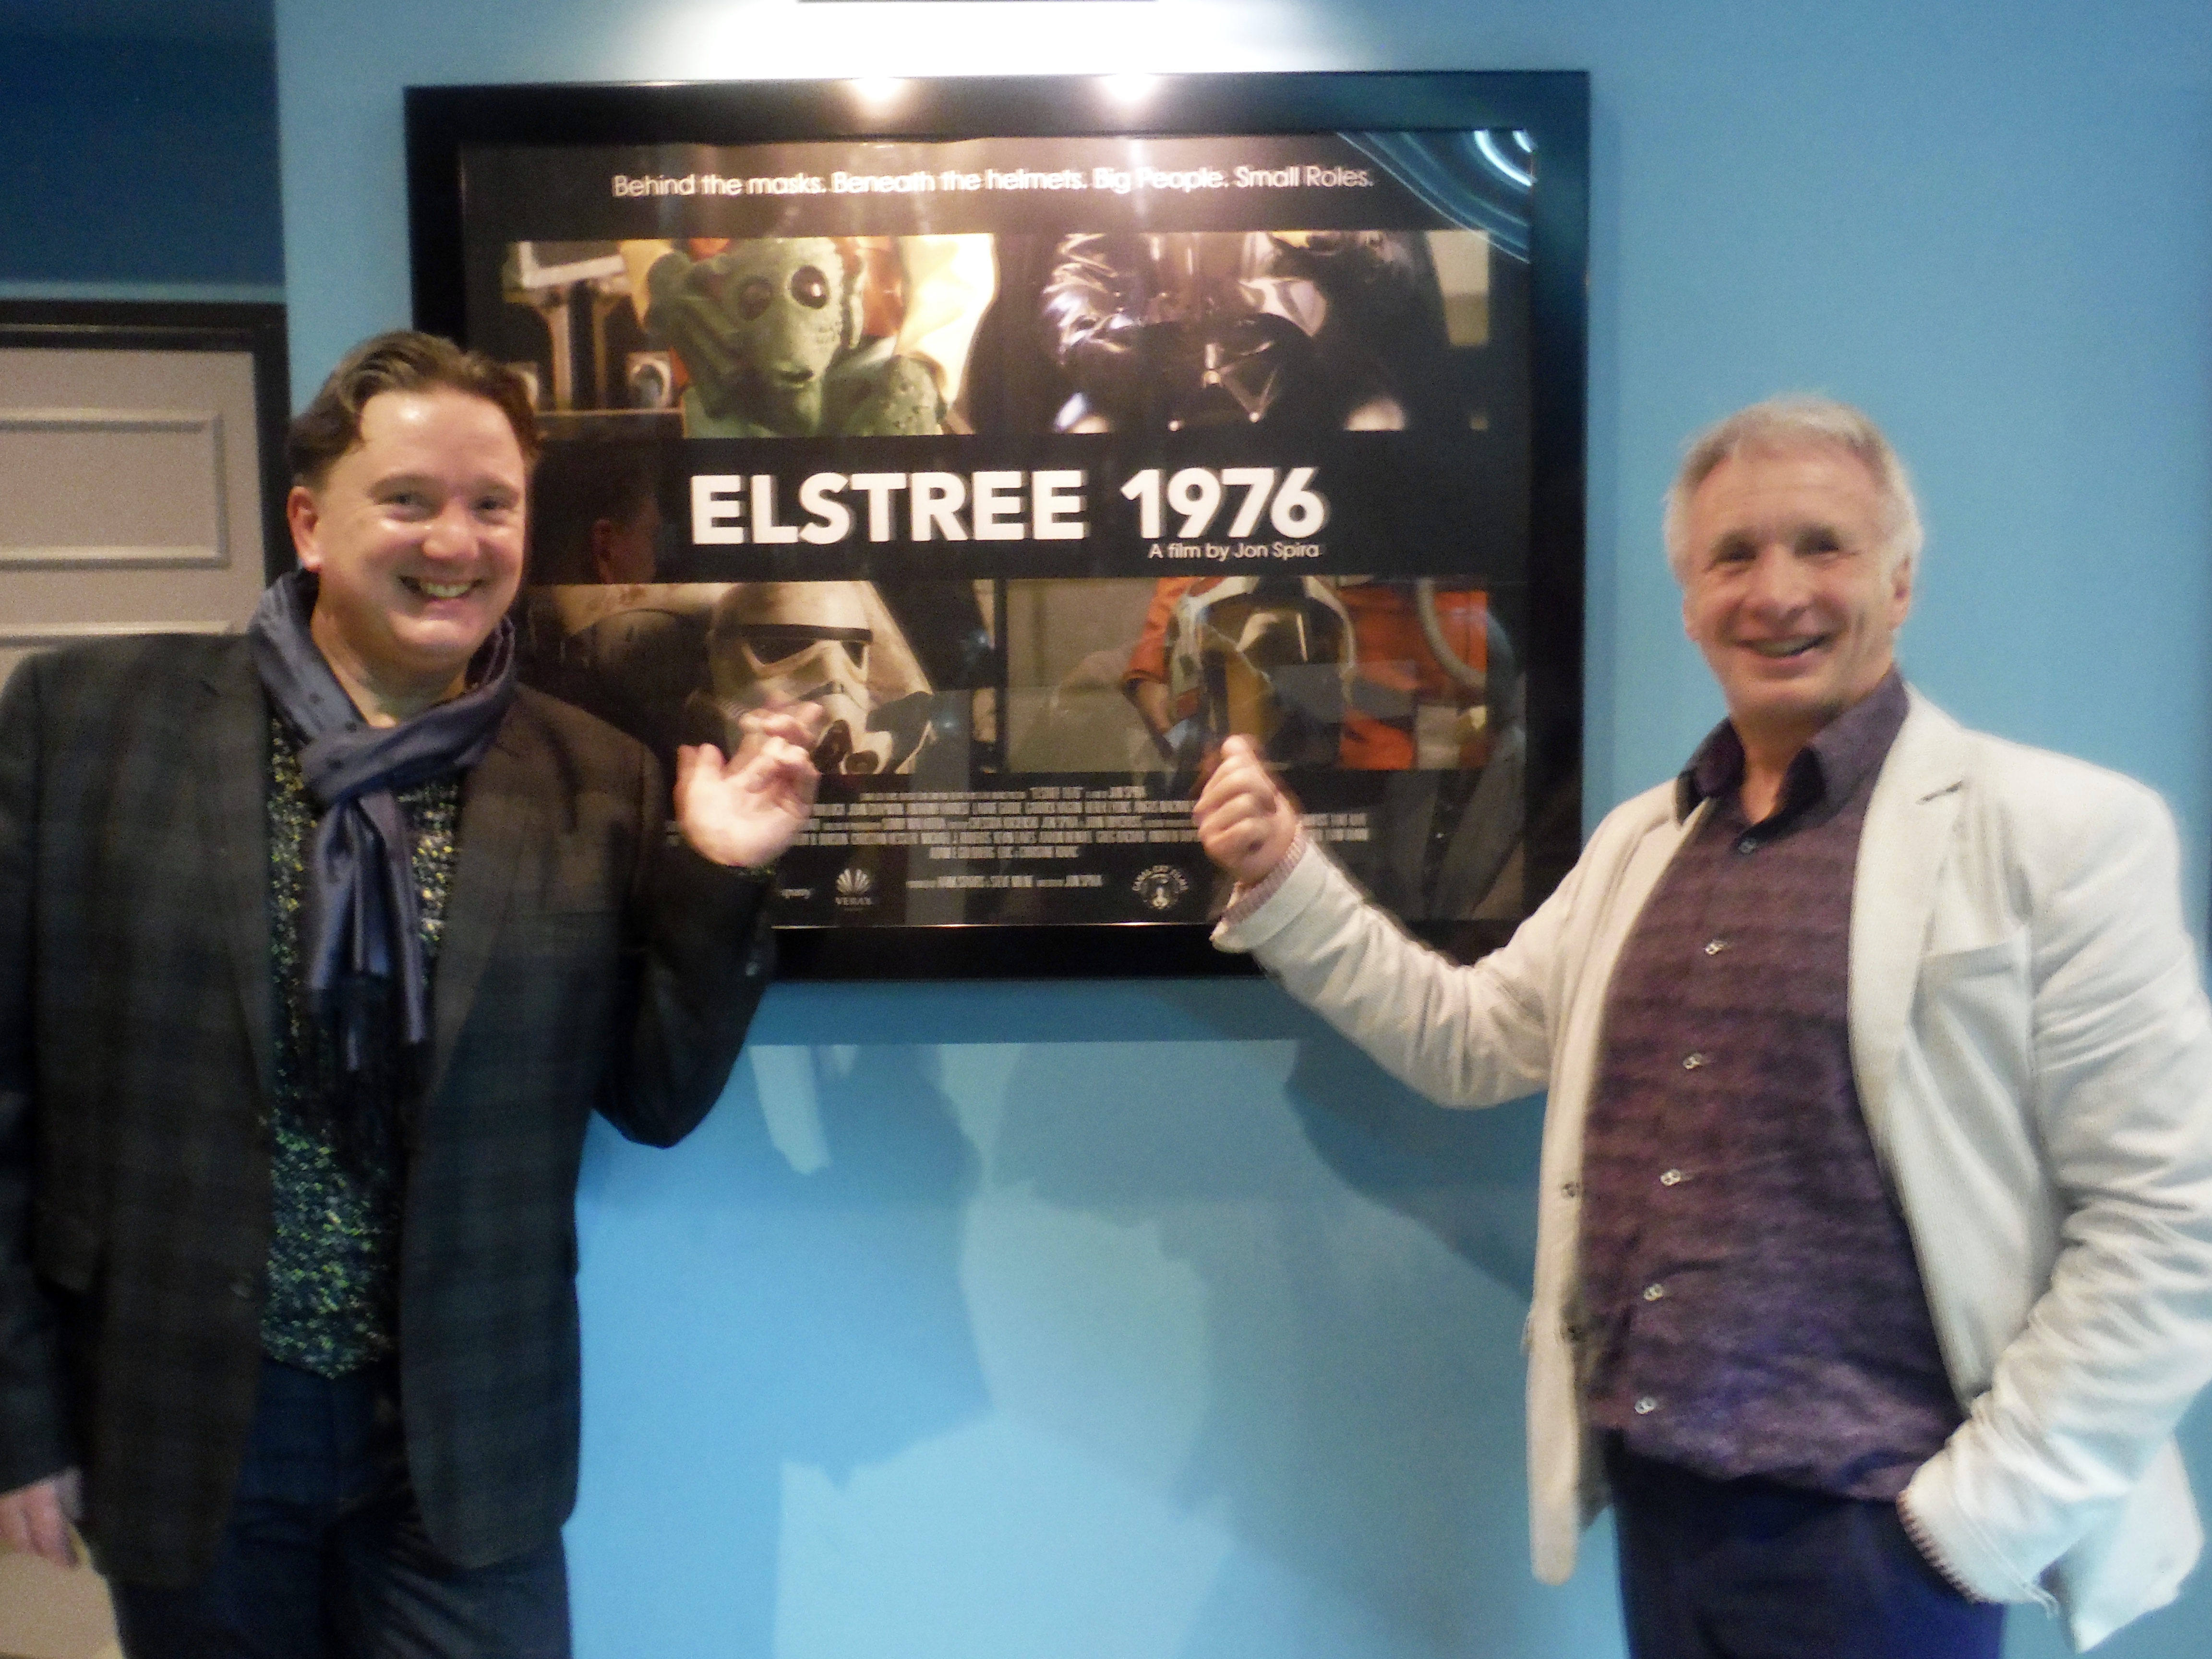 ELSTREE 1976 Me with John Chapman The World premier as part of the BFI London Film Festival at the Picturehouse Central on 9th October 2015